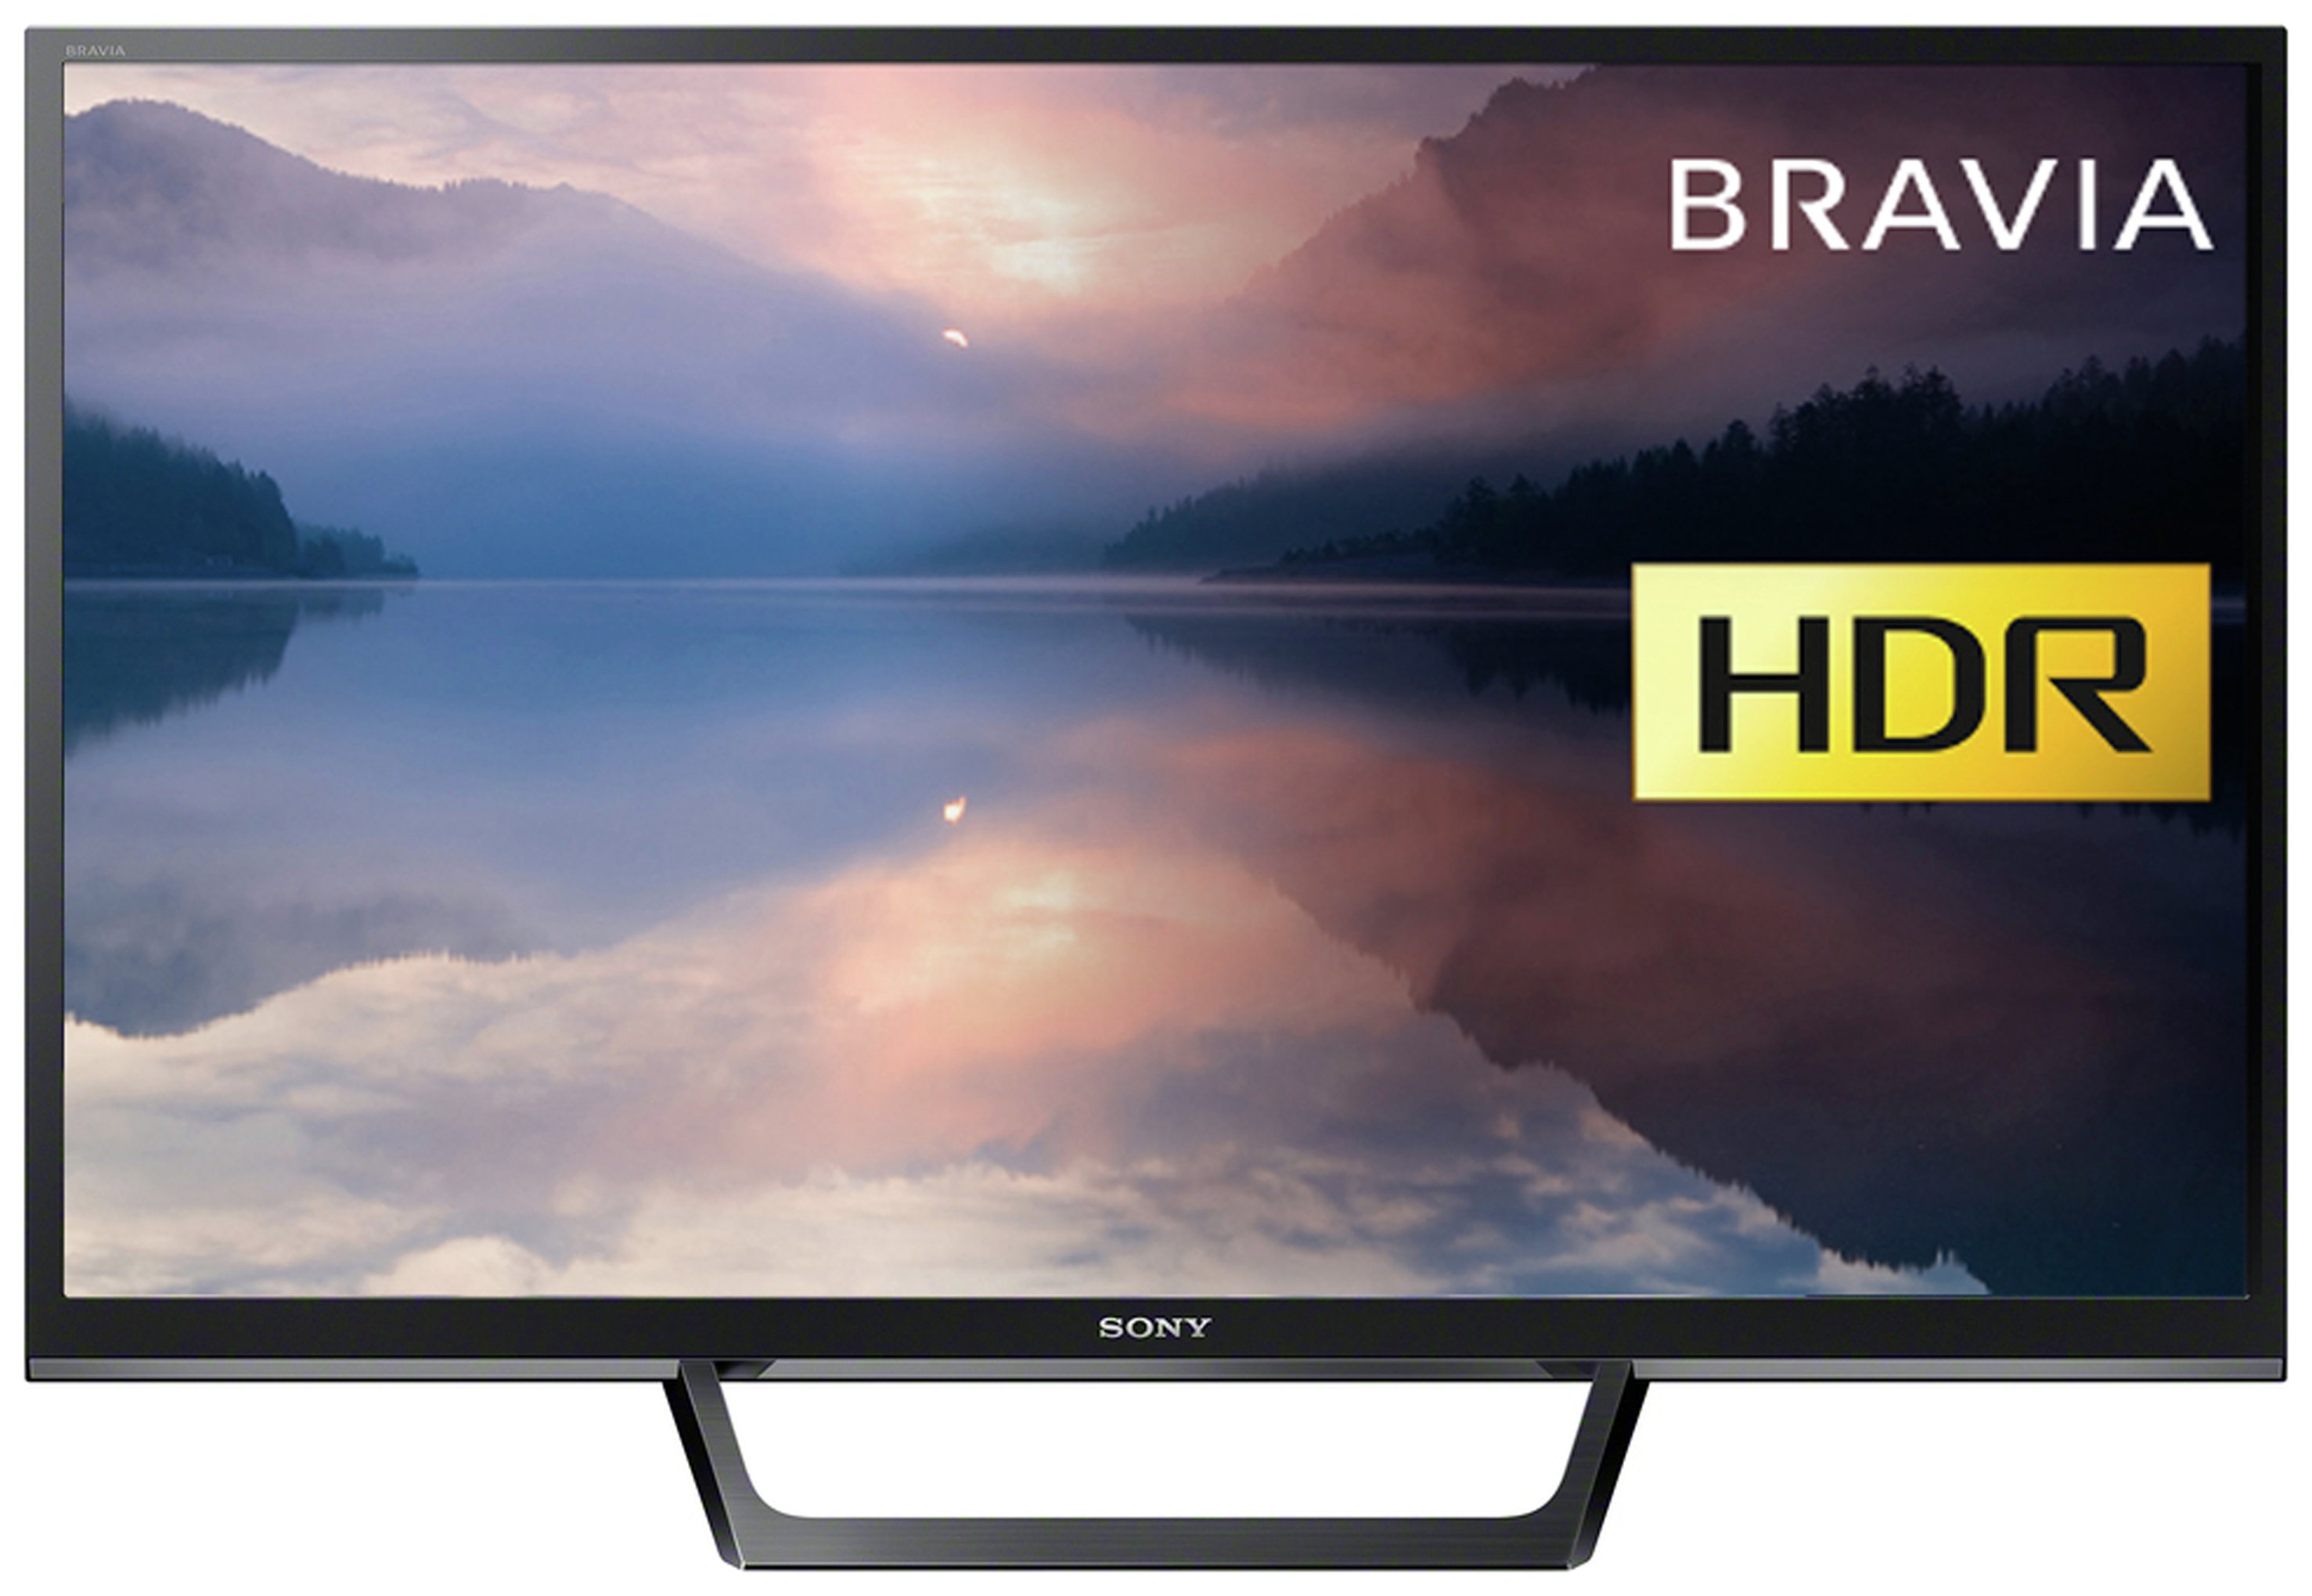 Sony KDL32RE403BU 32 Inch HD Ready TV with HDR review